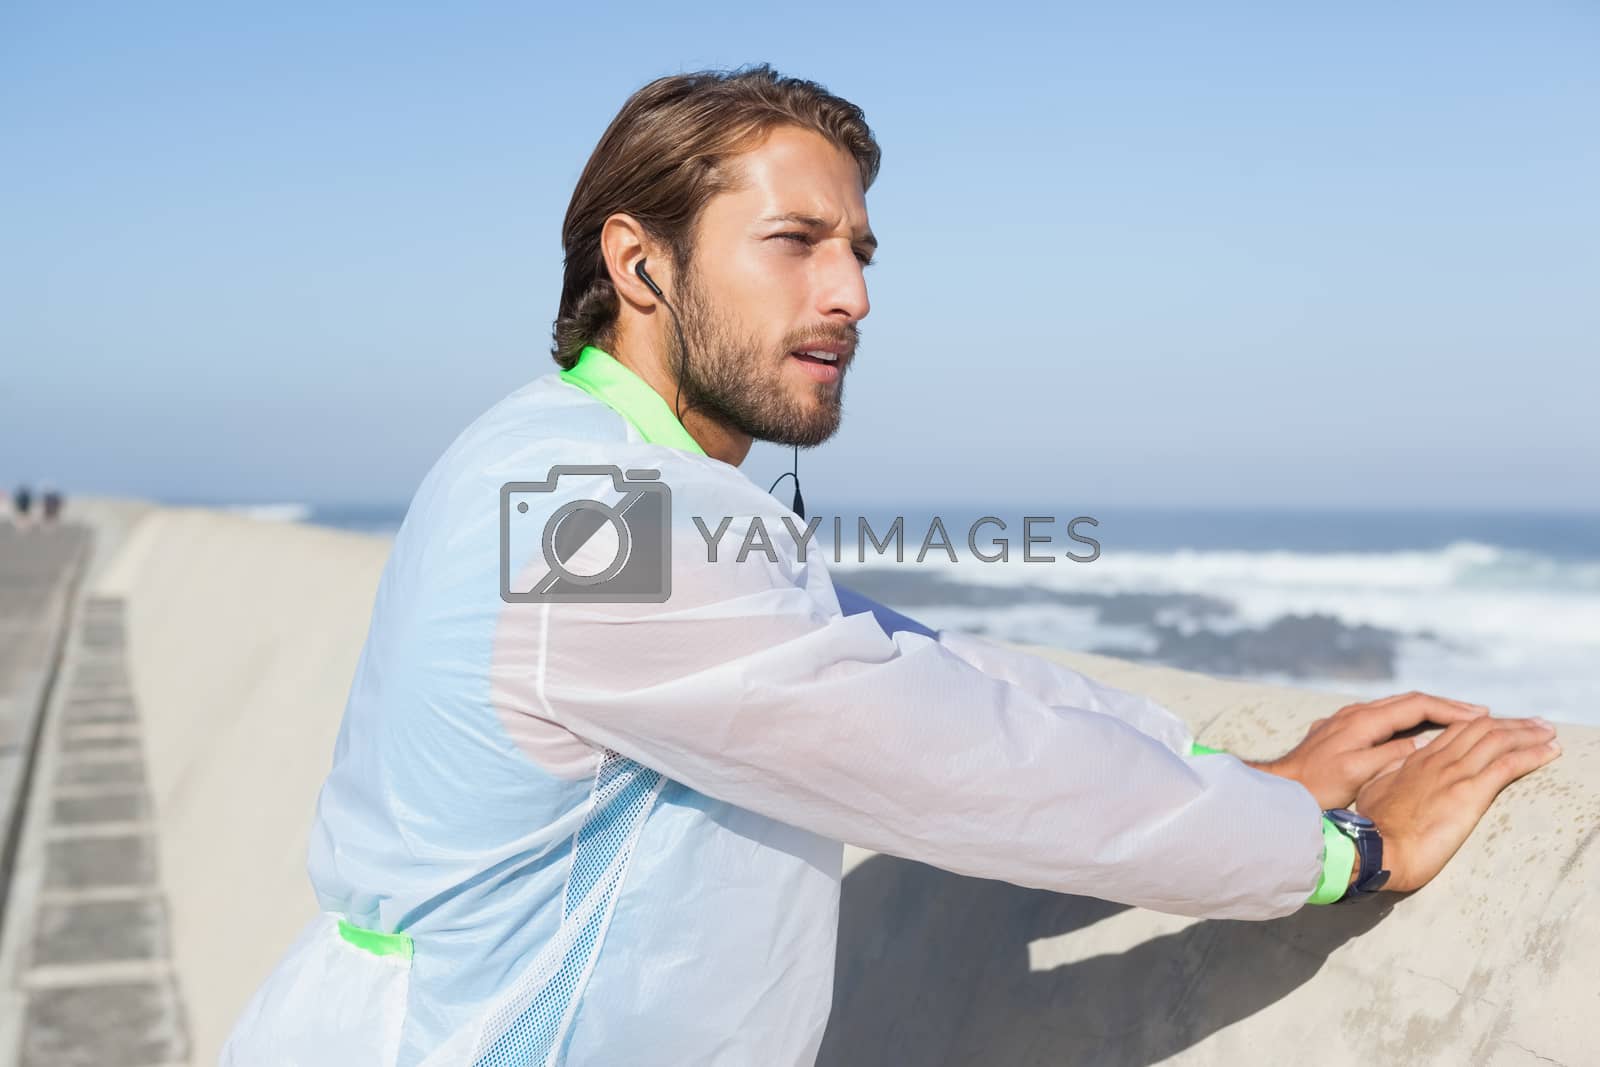 Royalty free image of Fit man warming up on promenade by Wavebreakmedia